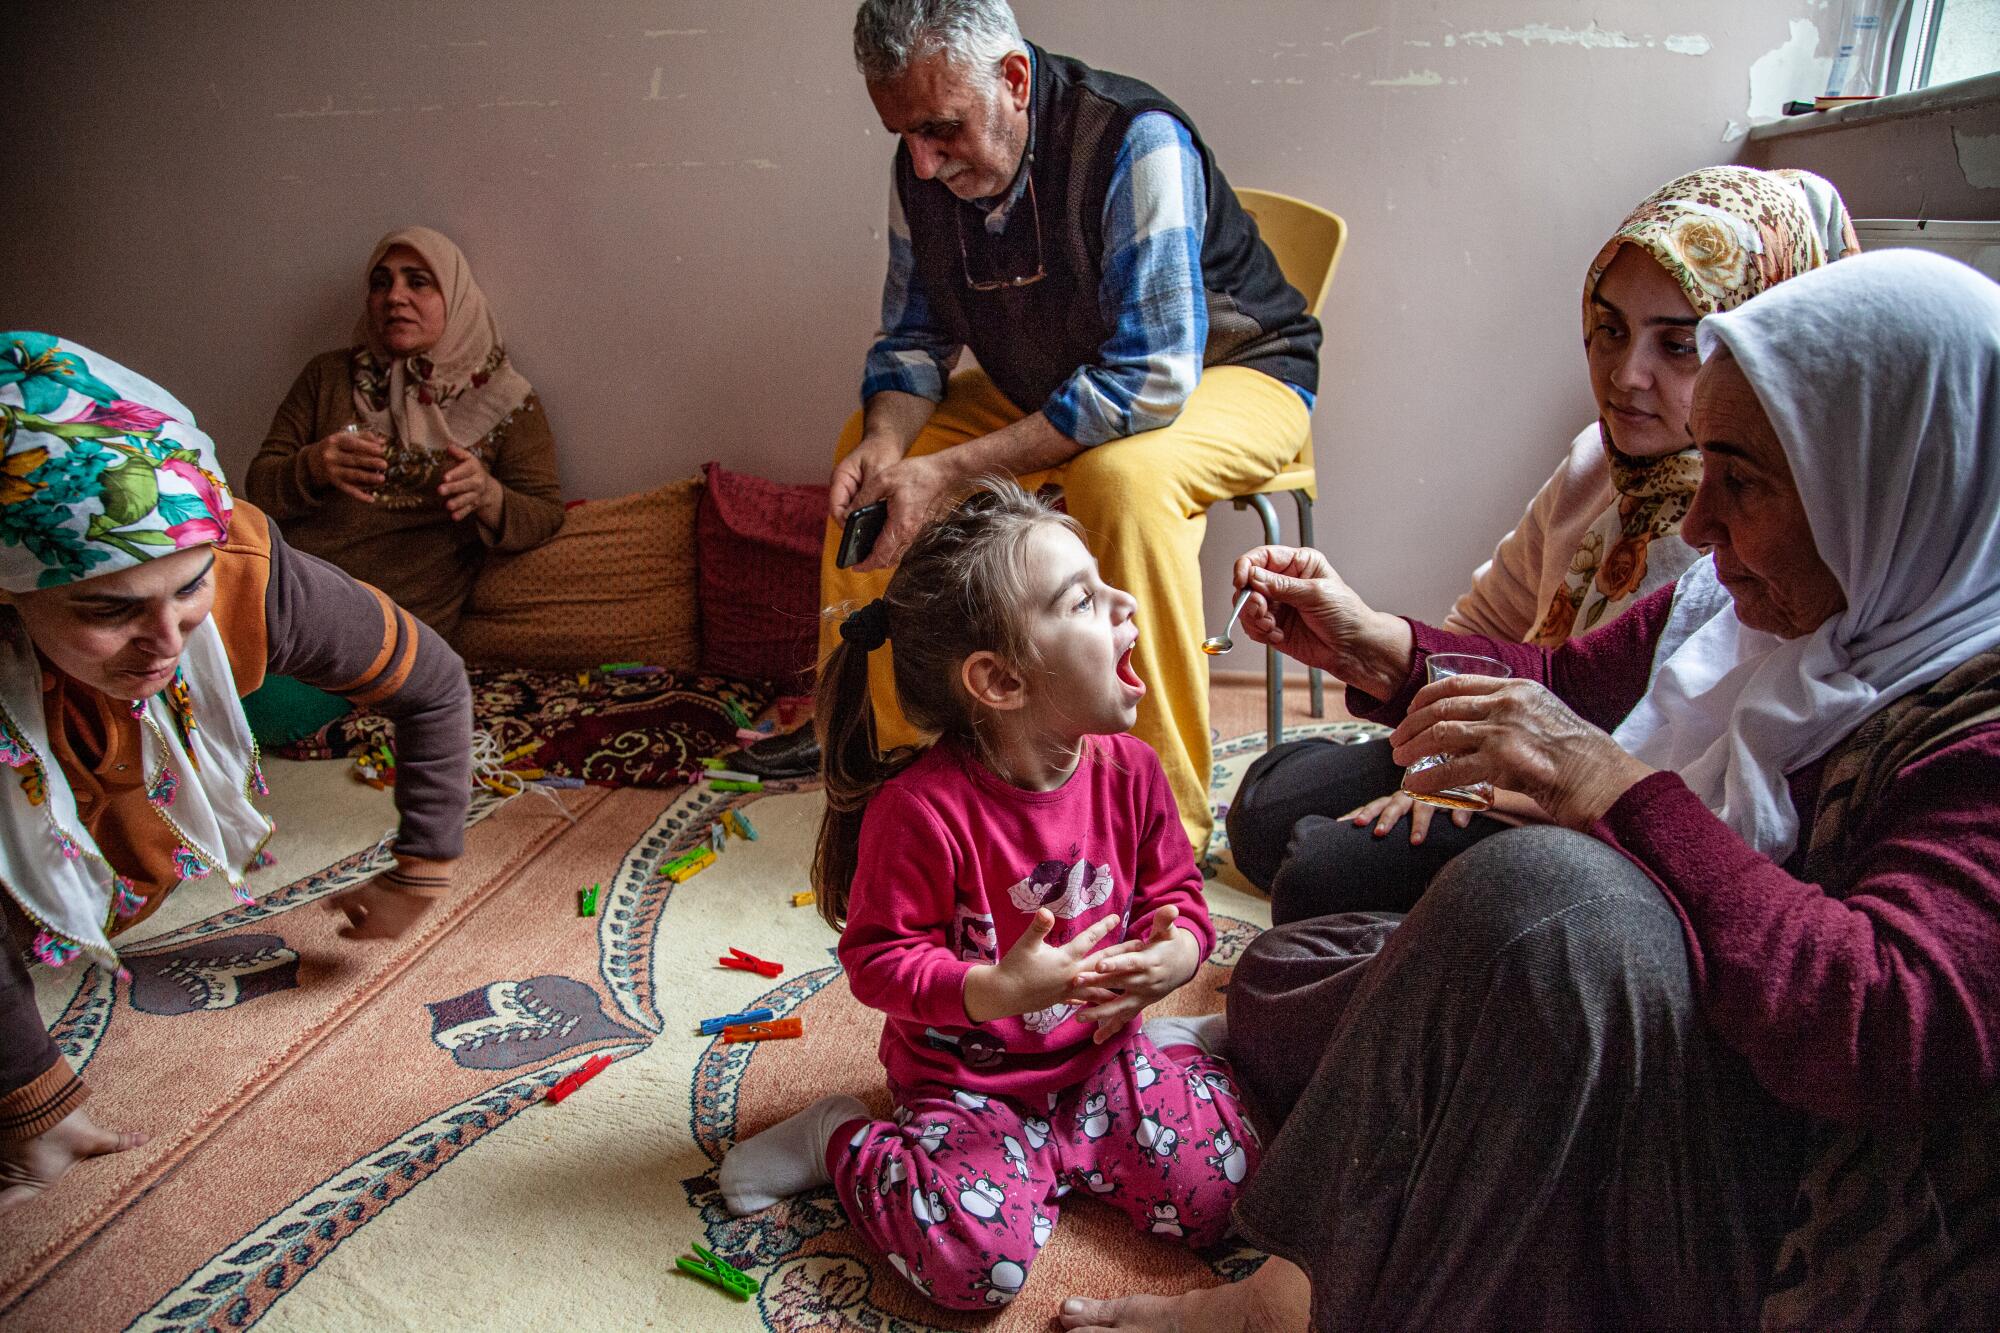 A man sits in a chair near four women in headscarves who are seated on a rug, one feeding a girl in pink clothes 